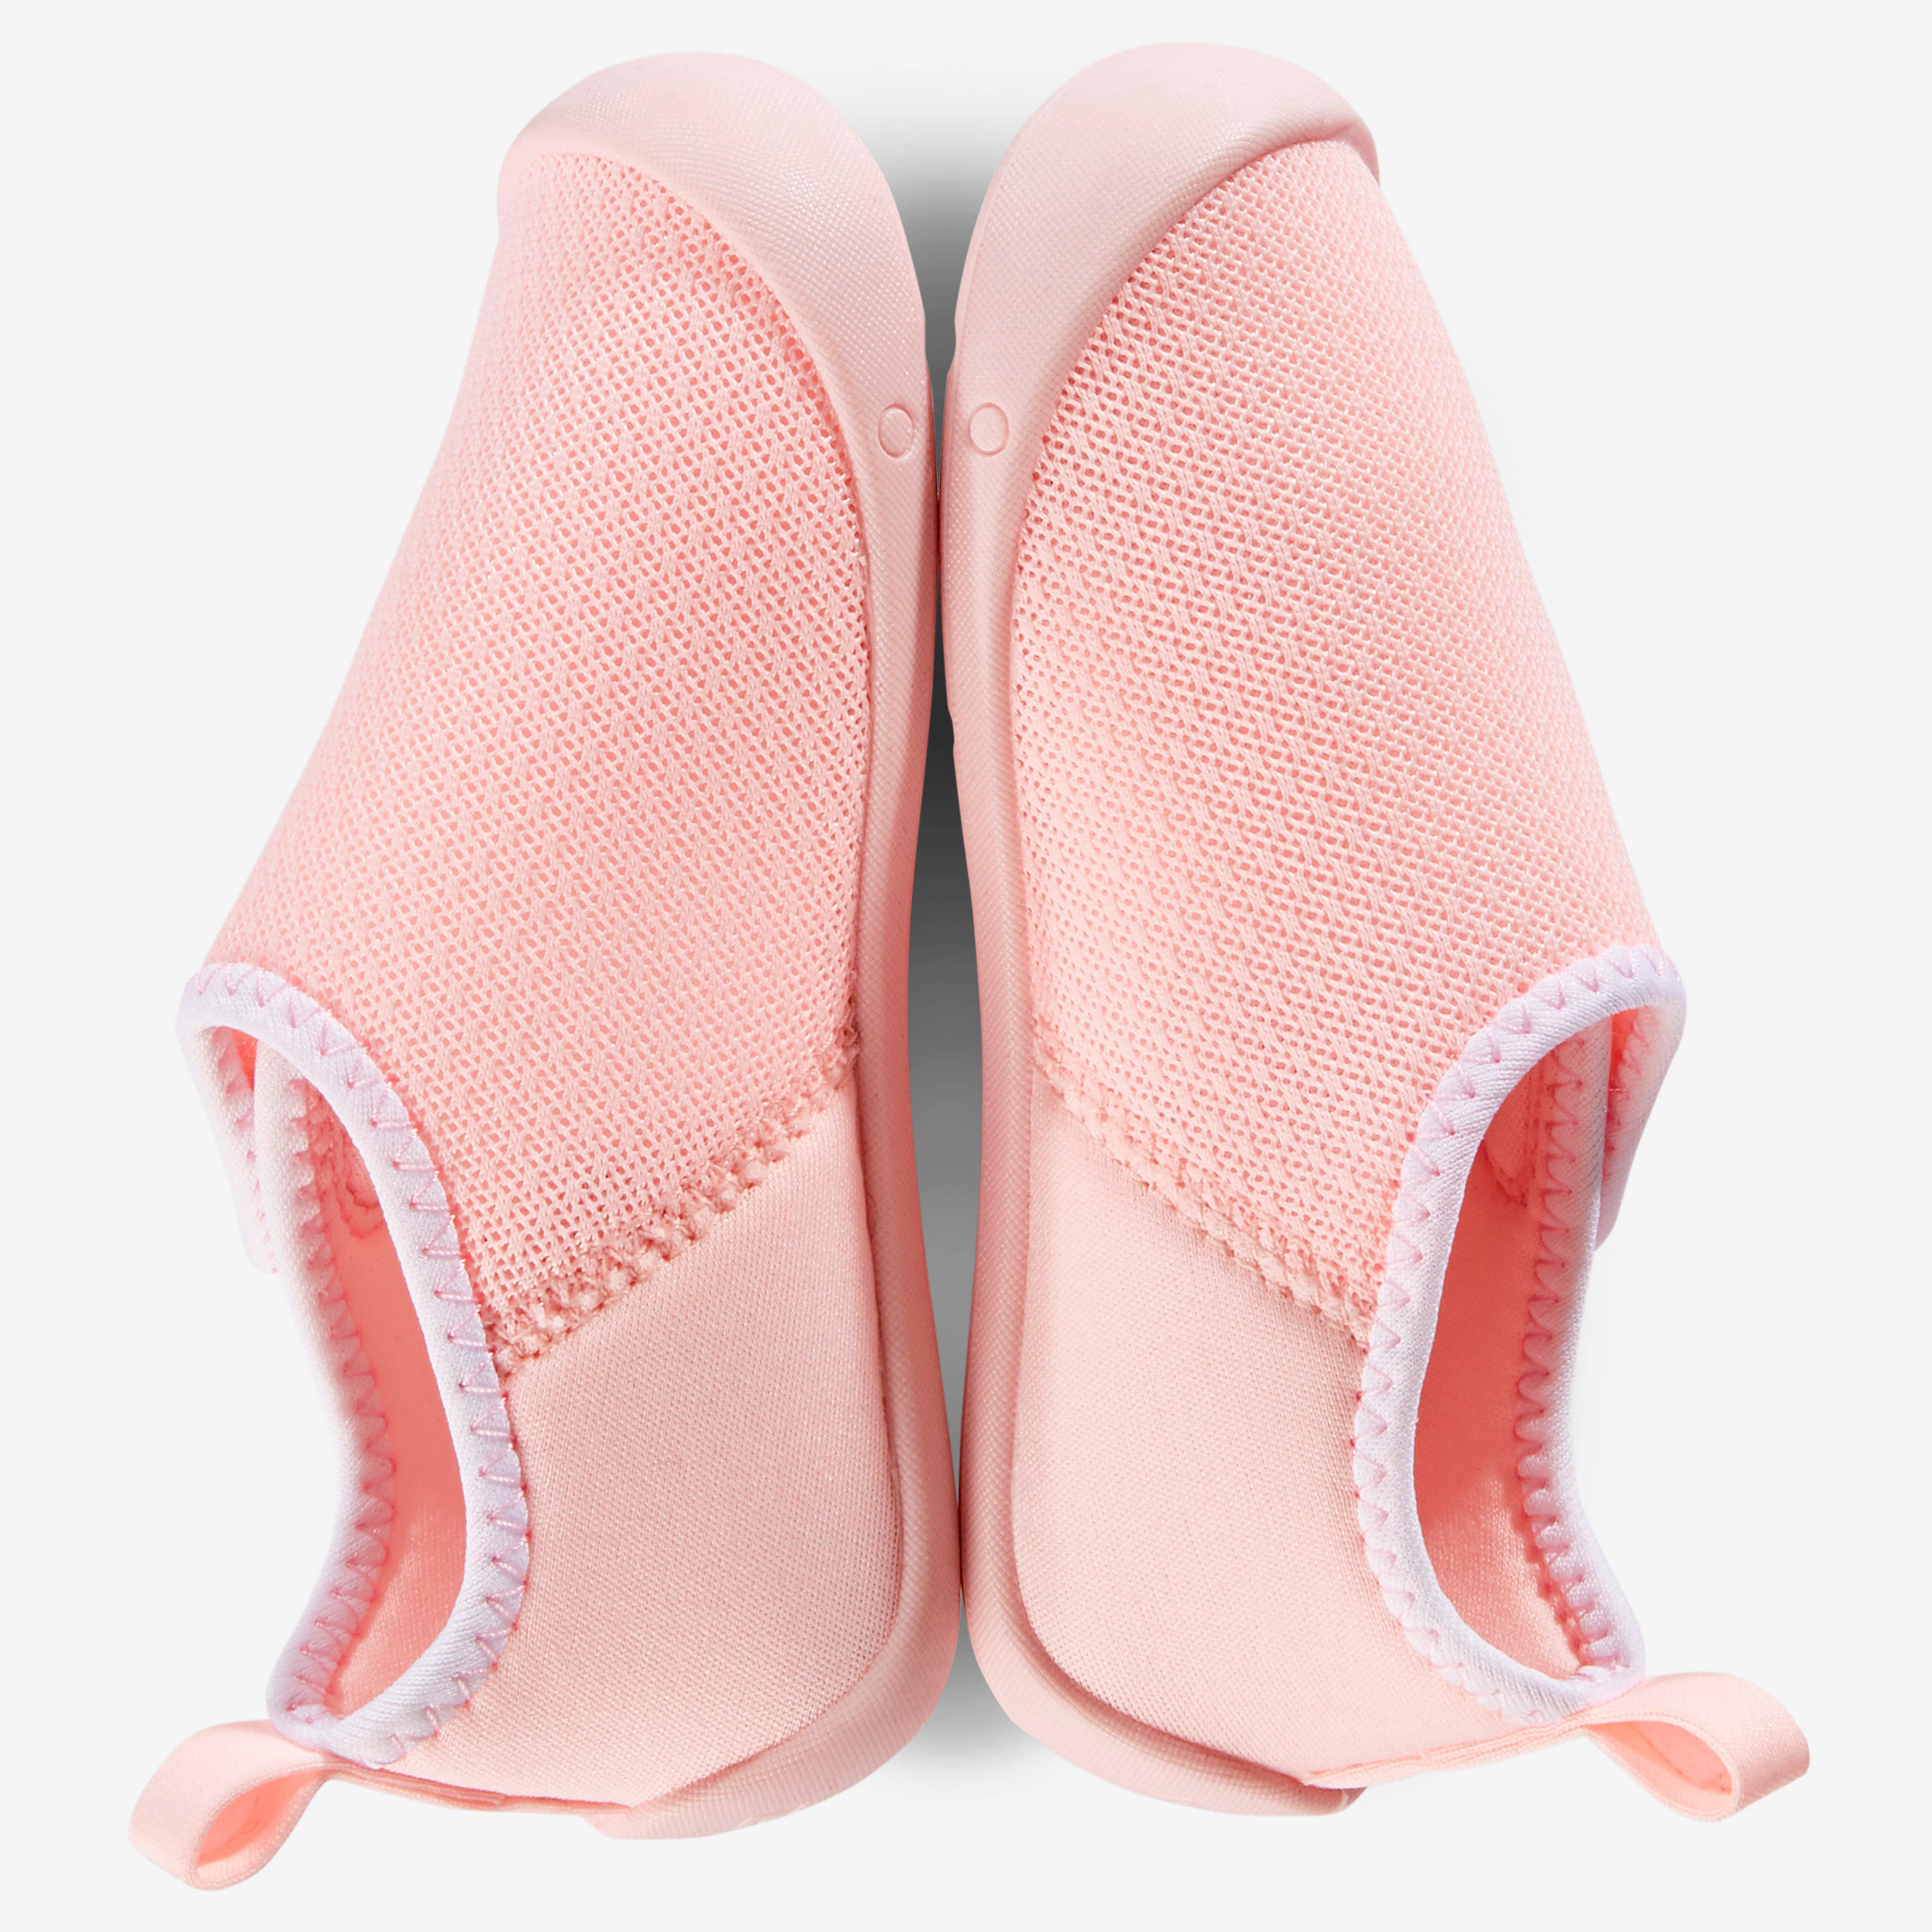 Kids' Bootees - Pink 7/8